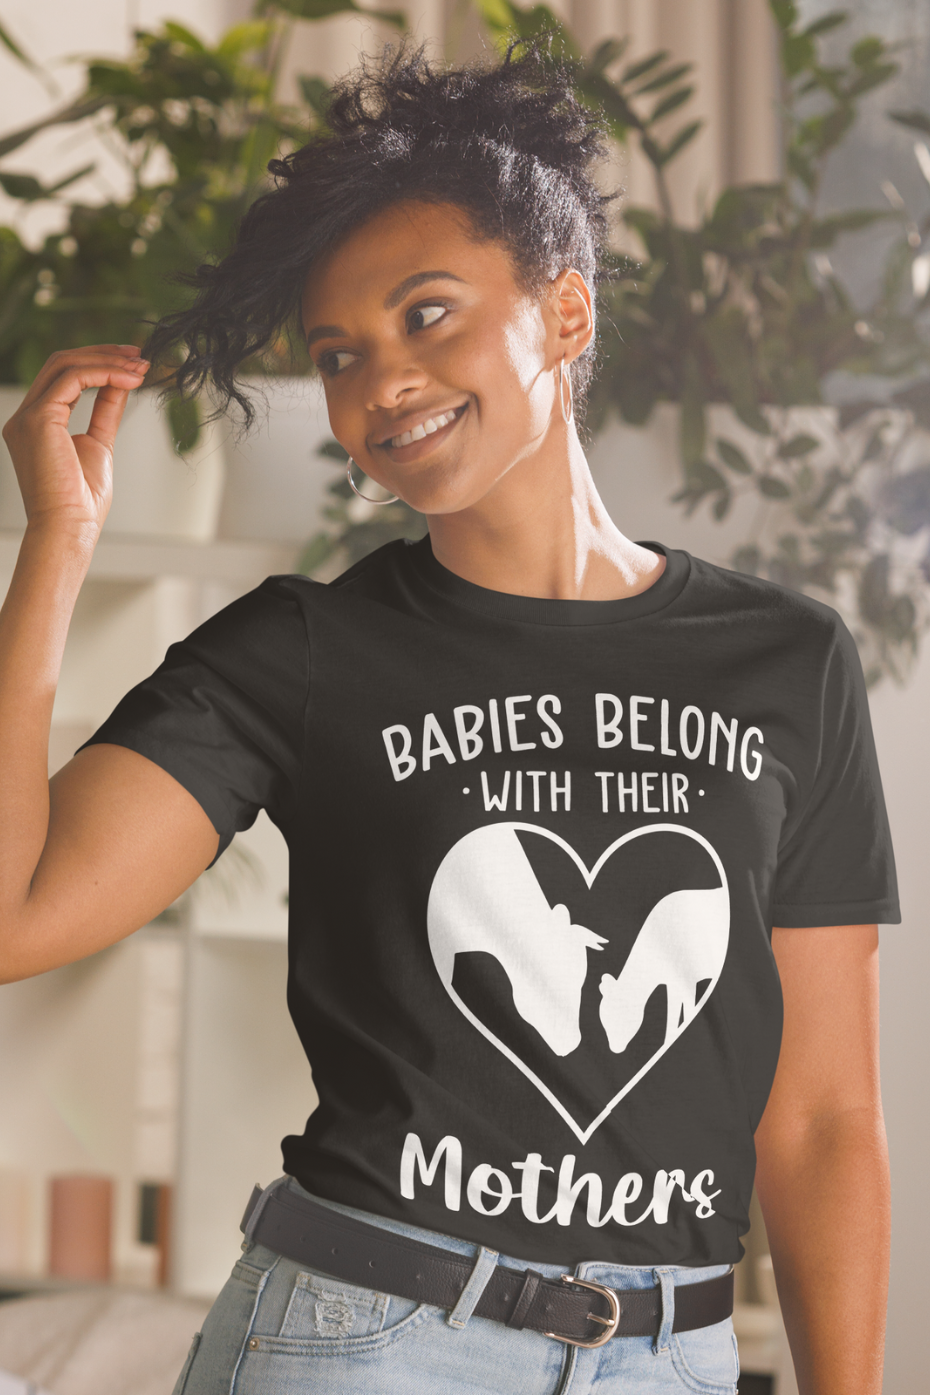 Babies Belong With Their Mothers Unisex Softstyle T-shirt